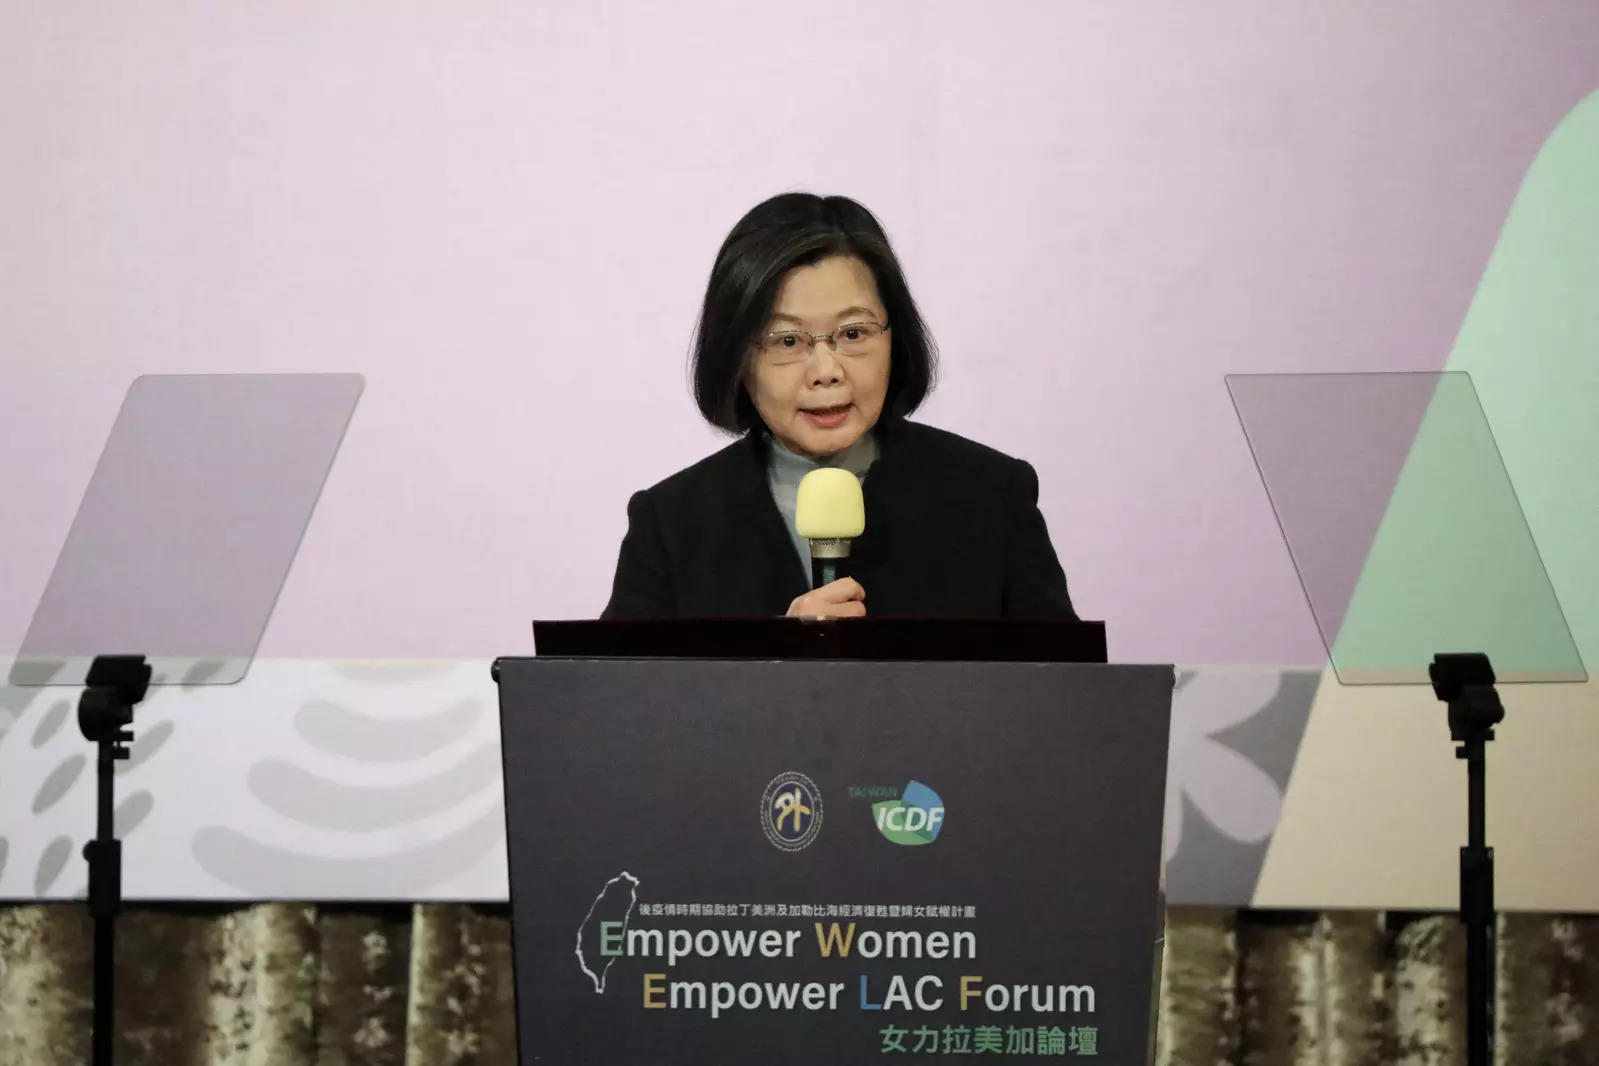 President Tsai Ing-wen said it was time "to explore even more opportunities for cooperation" between the US and Taiwan.